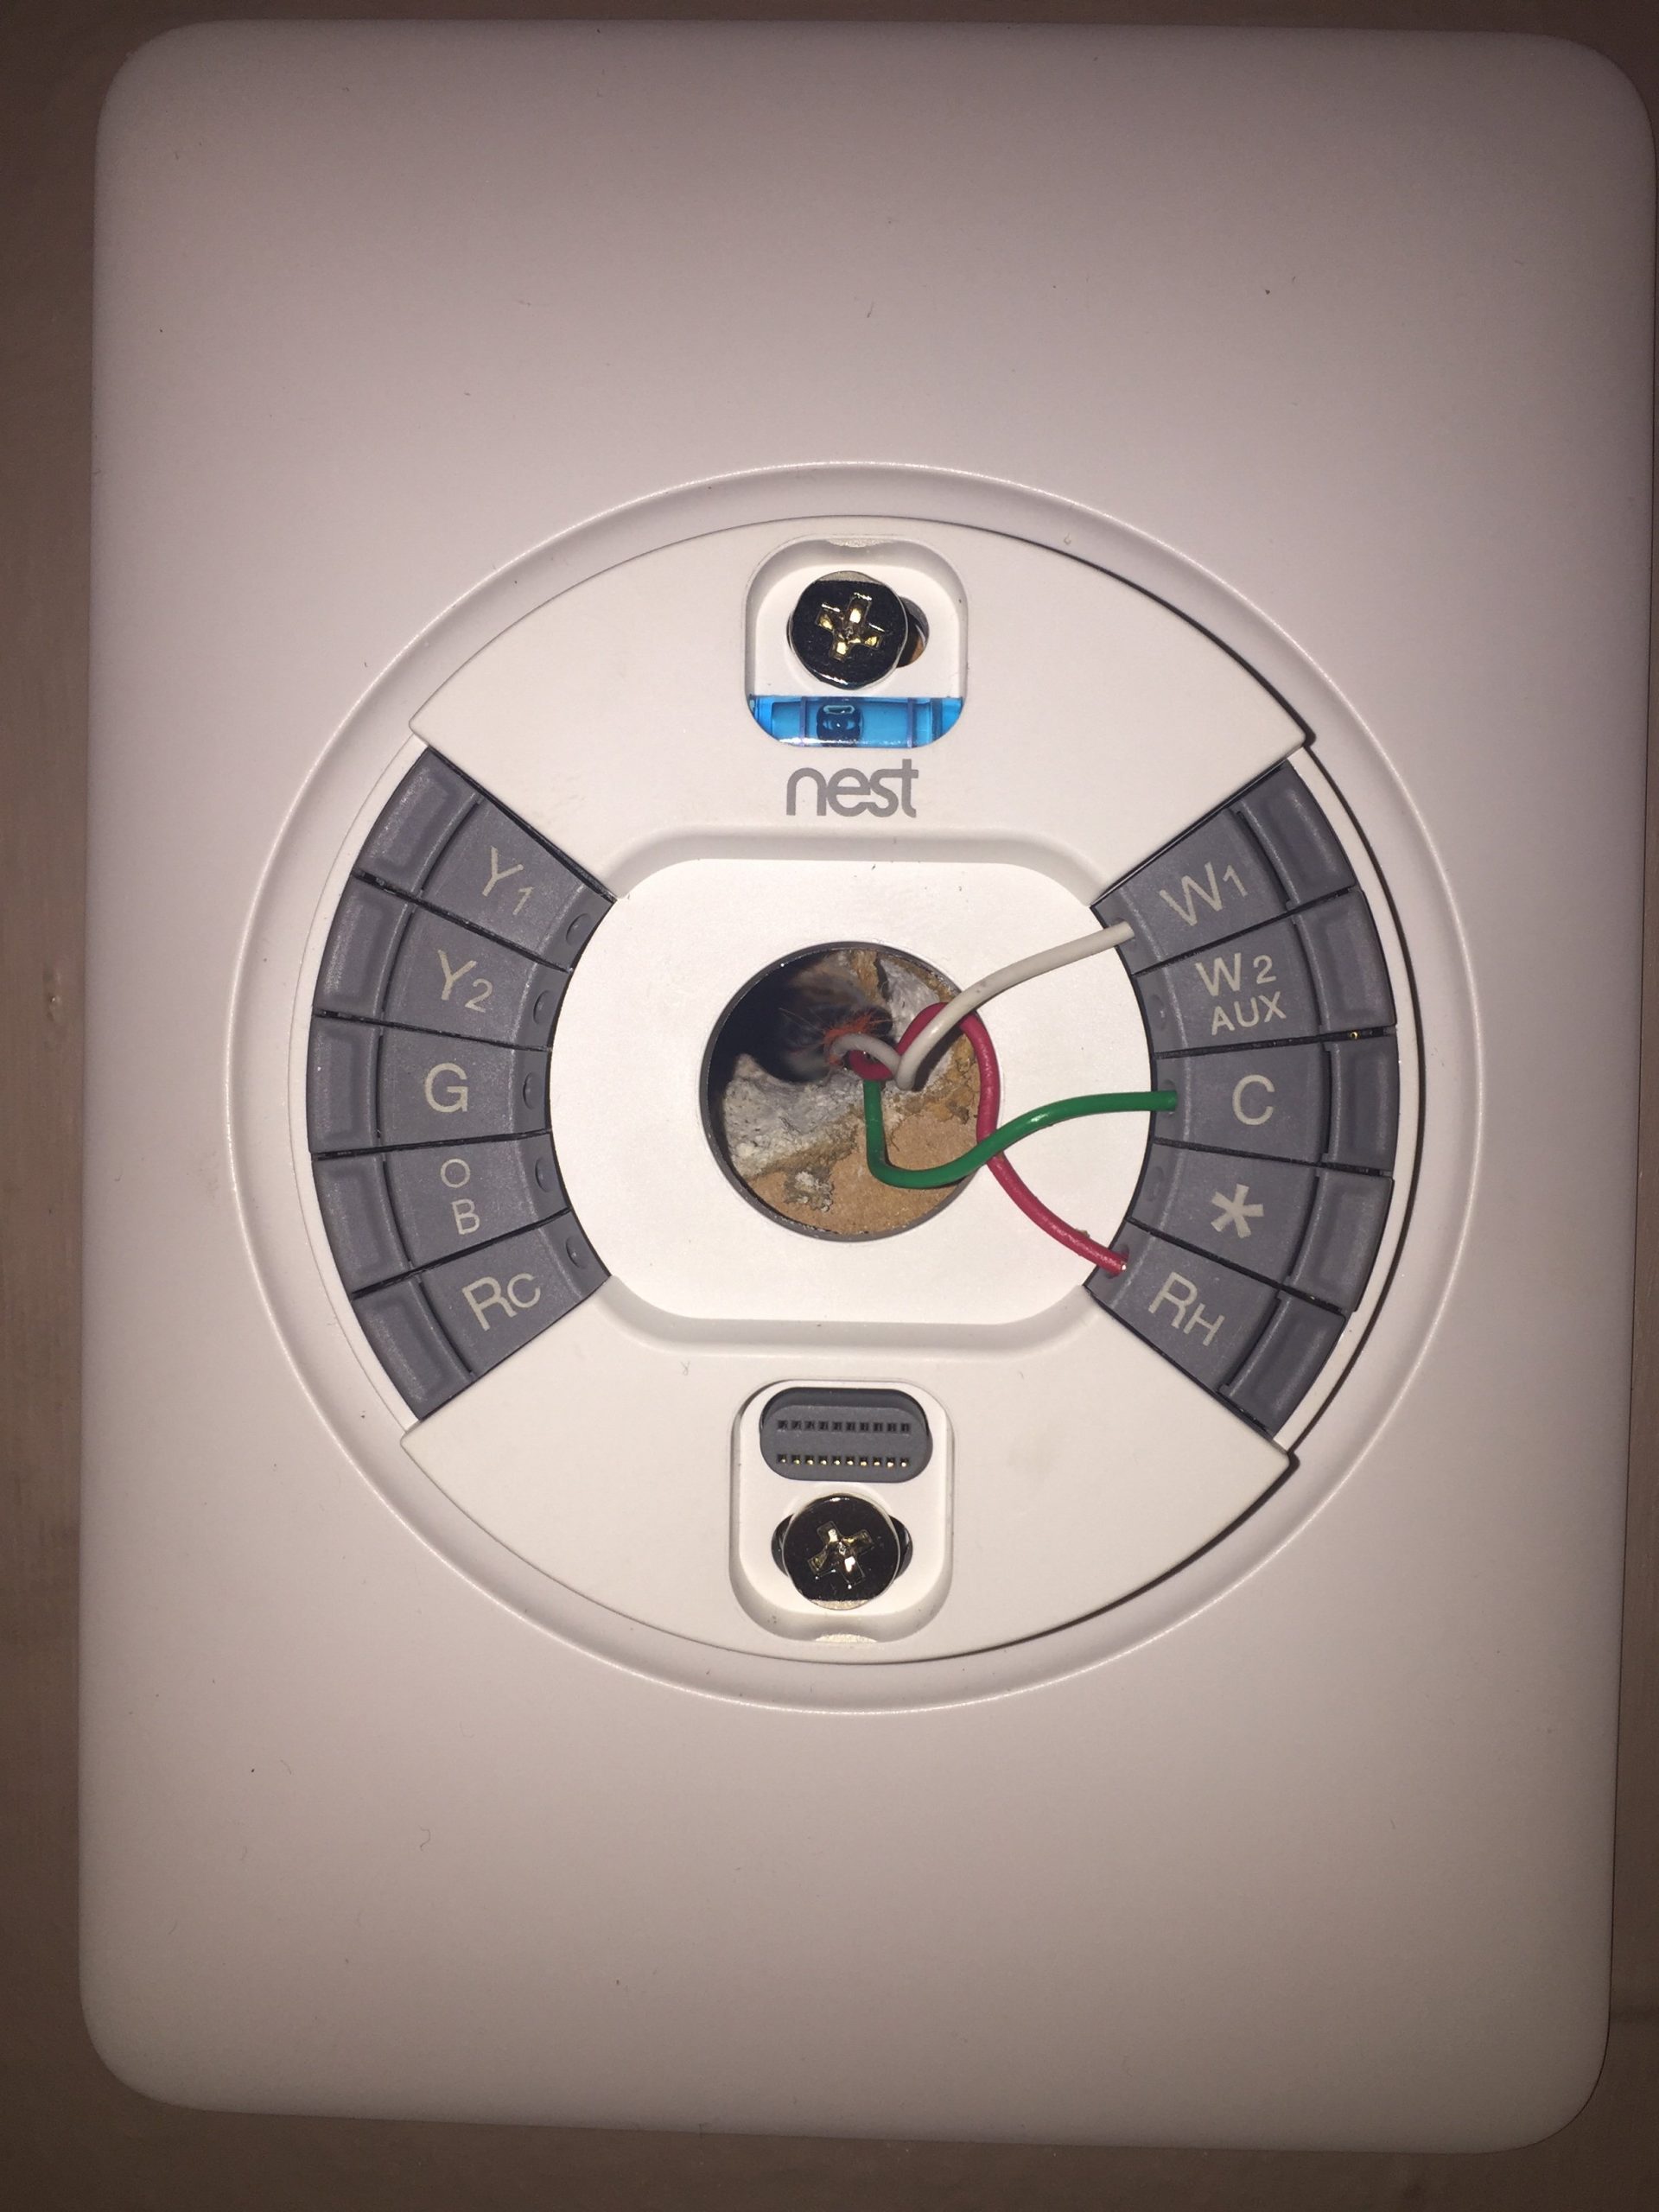 Gas Fireplace thermostats Lovely Convert Nest to Support Millivolt — Heating Help the Wall